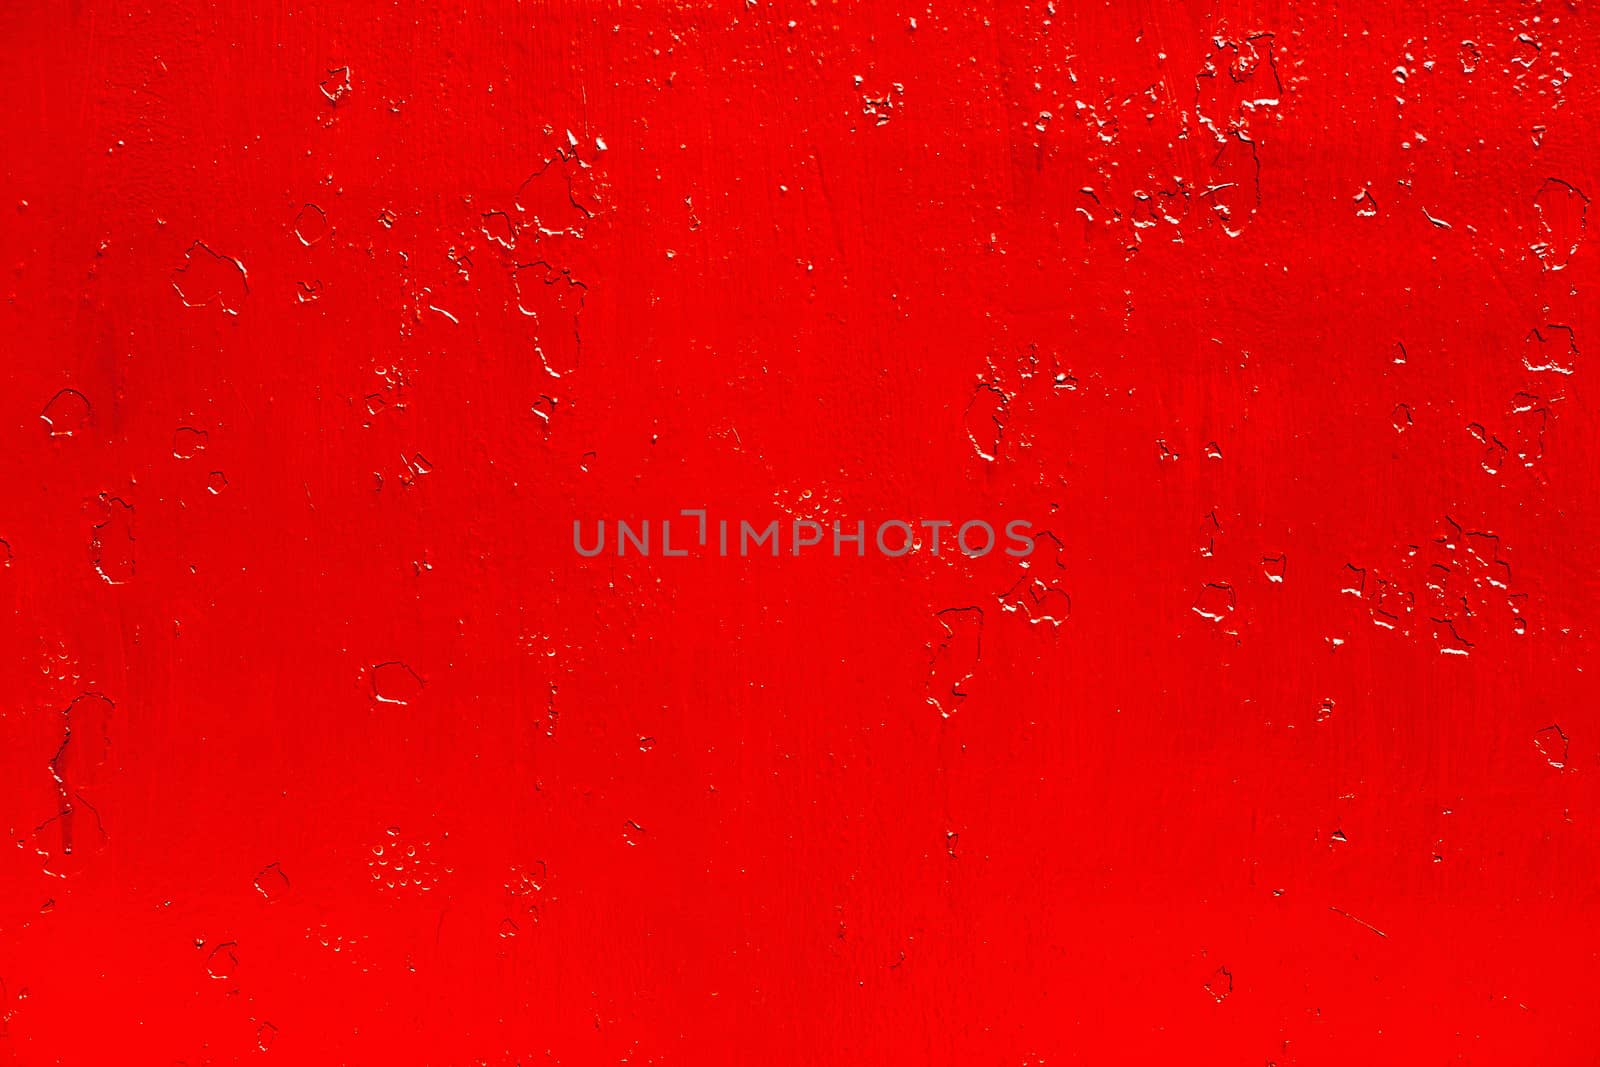 abstract background of old red paint on the metal surface